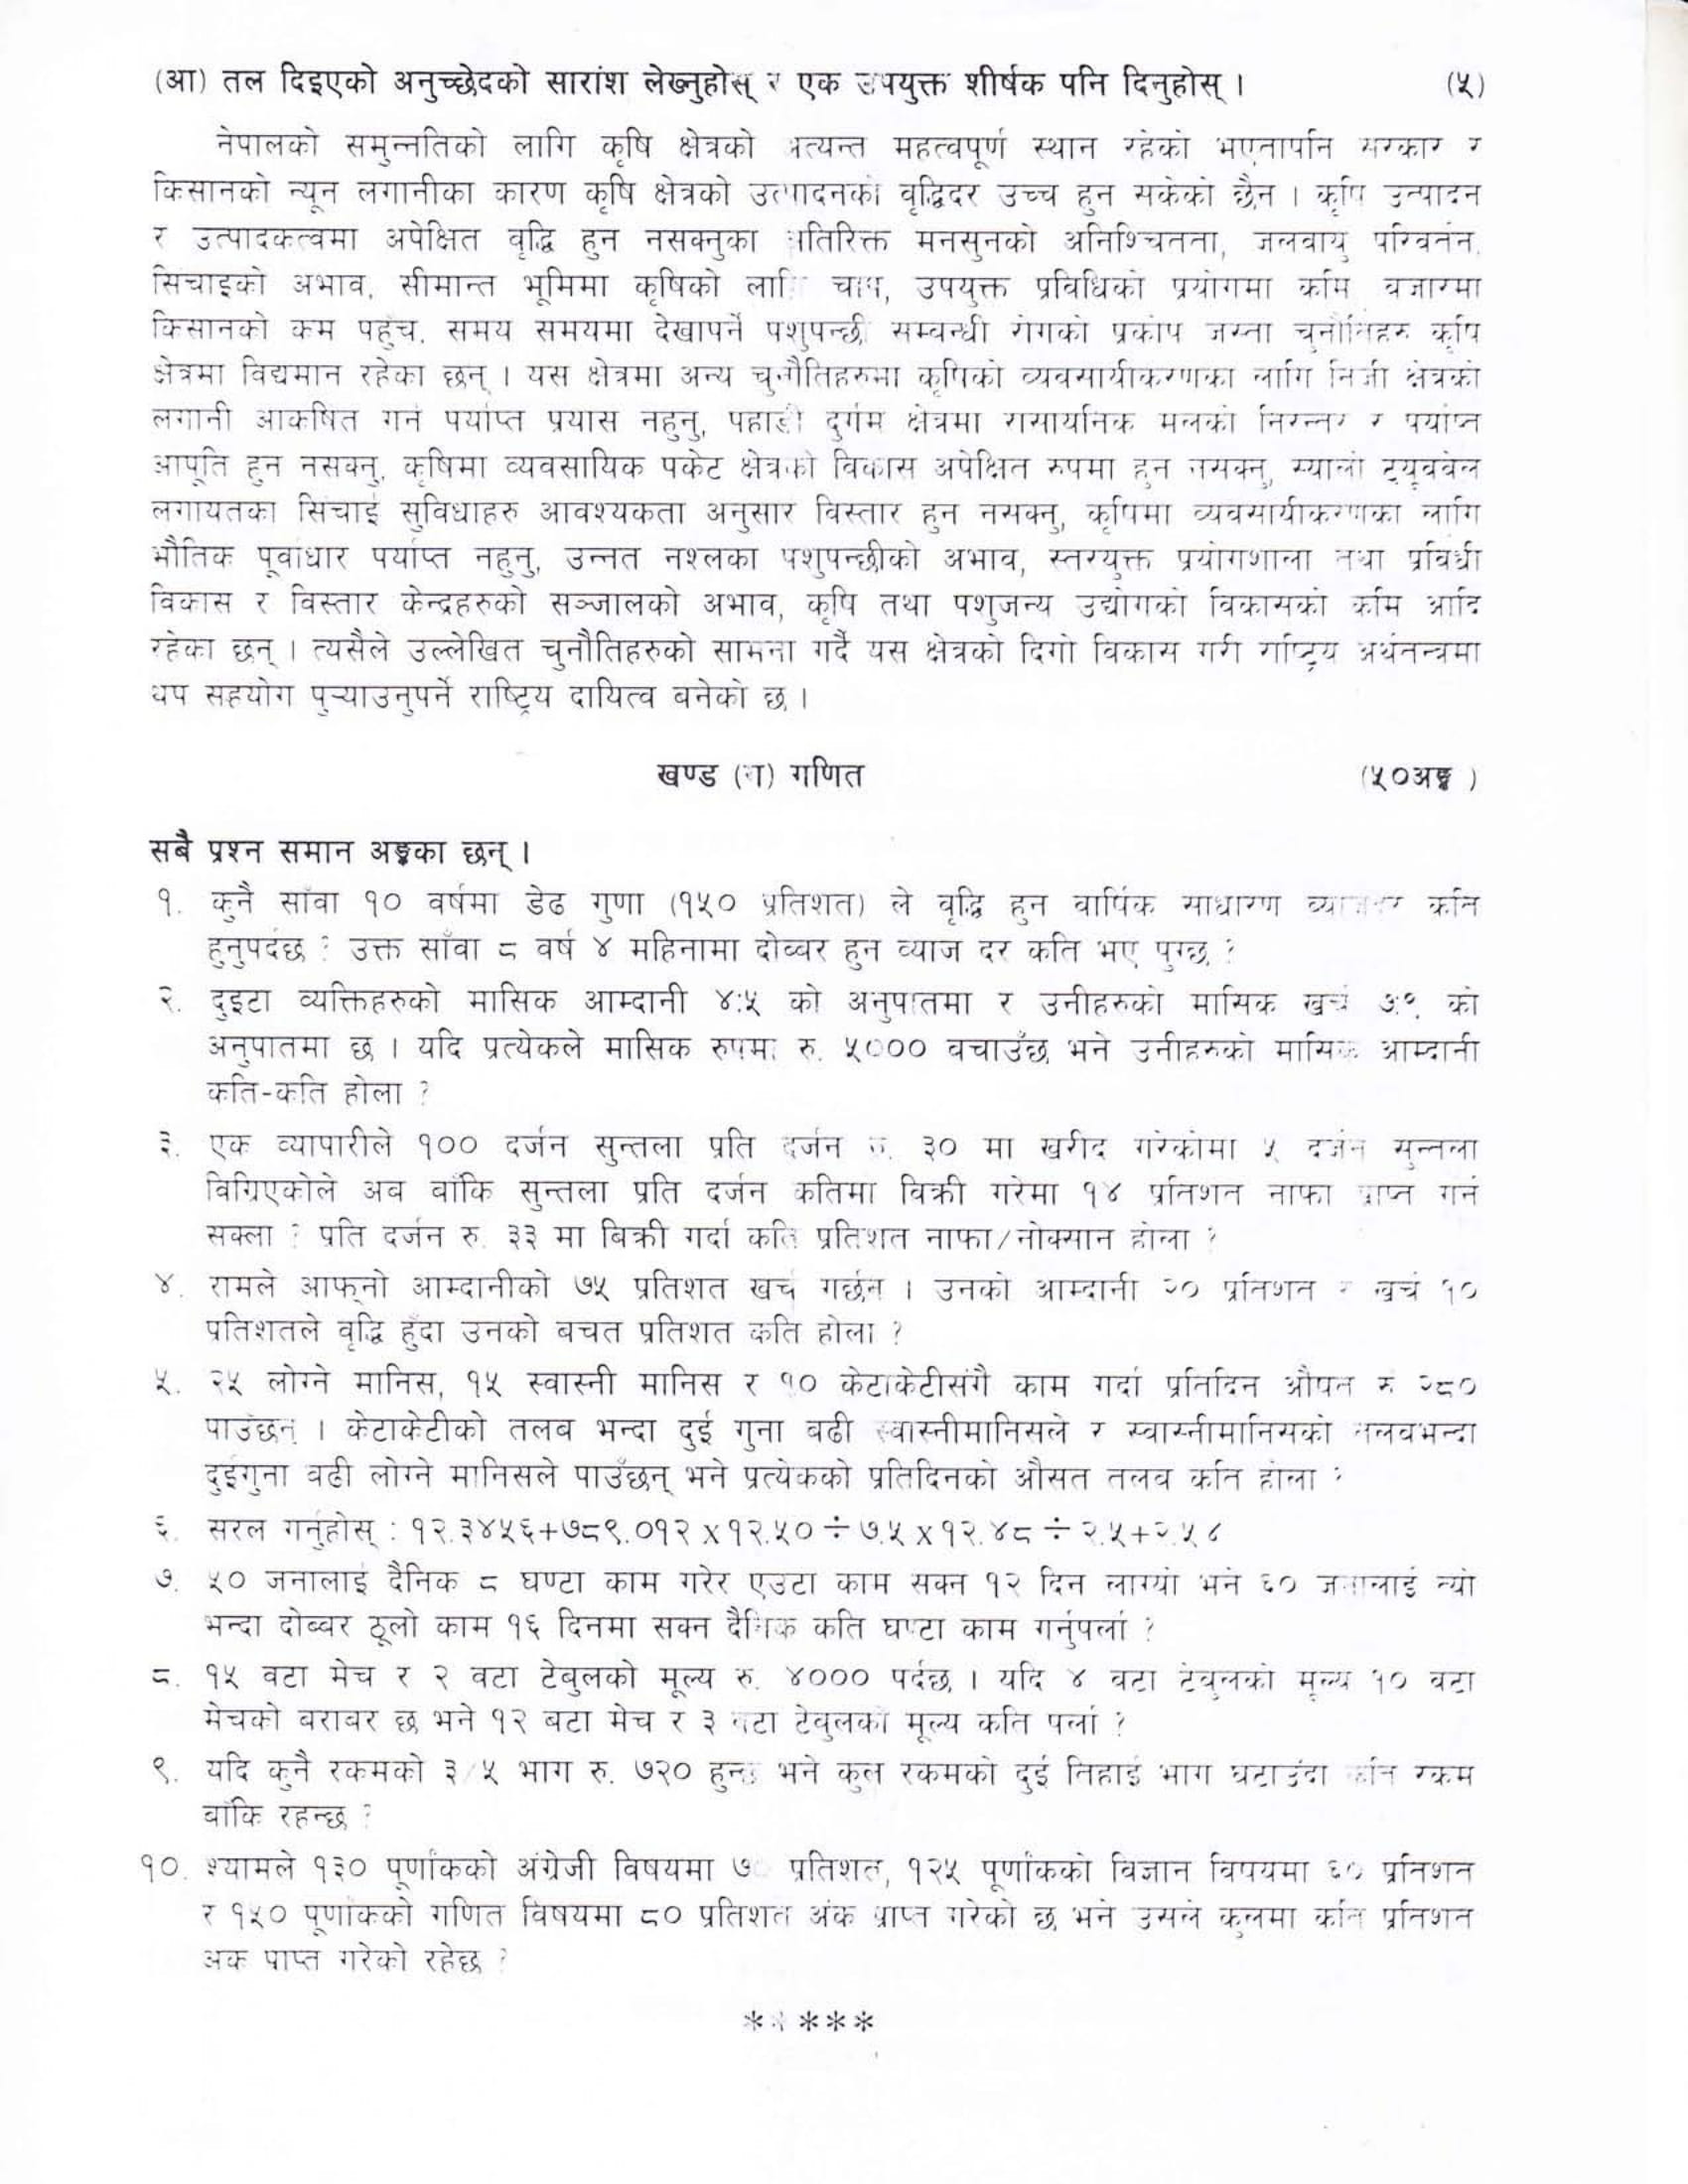 Assistant Second - Sahayek Ditiye Nepal Rastra Bank (NRB) - Recent Papers And Model Questions